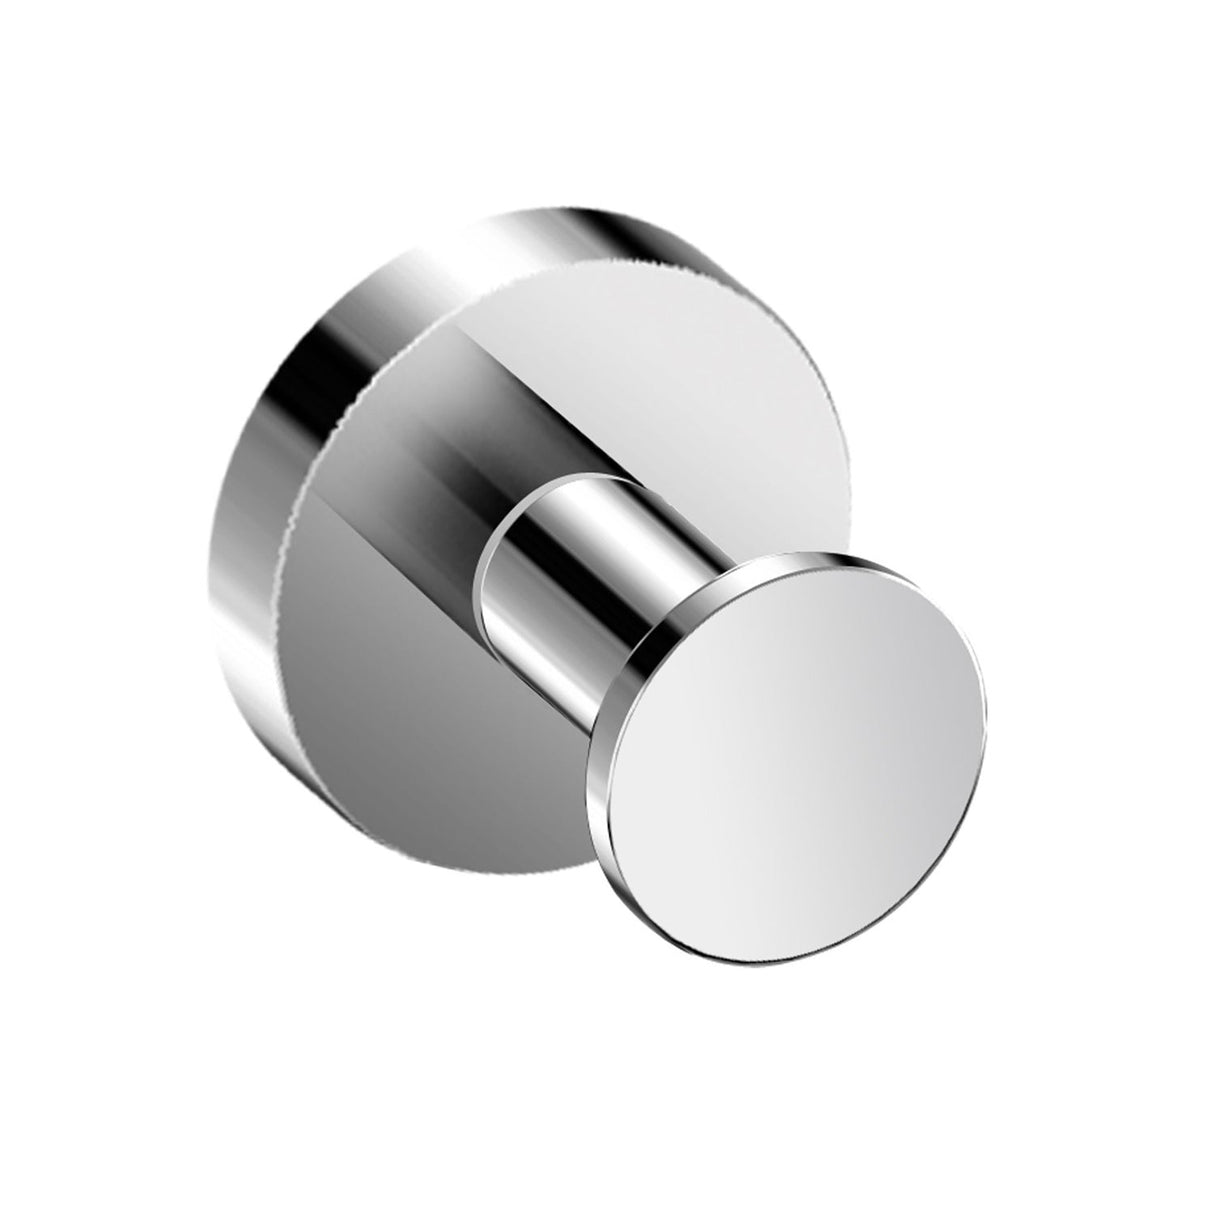 DAX Valencia Stainless Steel Towel Hook, Brushed Nickel DAX-GDC120121-BN